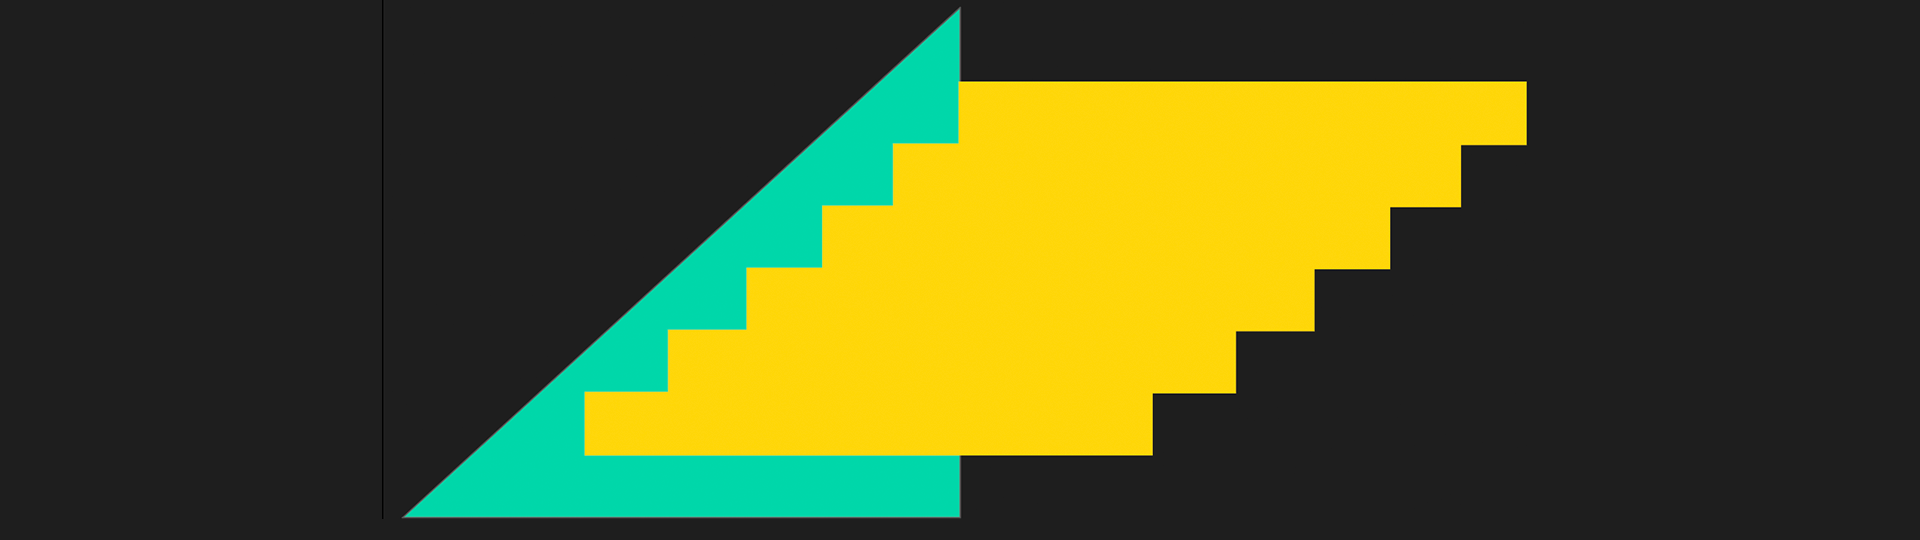 teal triangle with yellow rectangles on the left overlayed